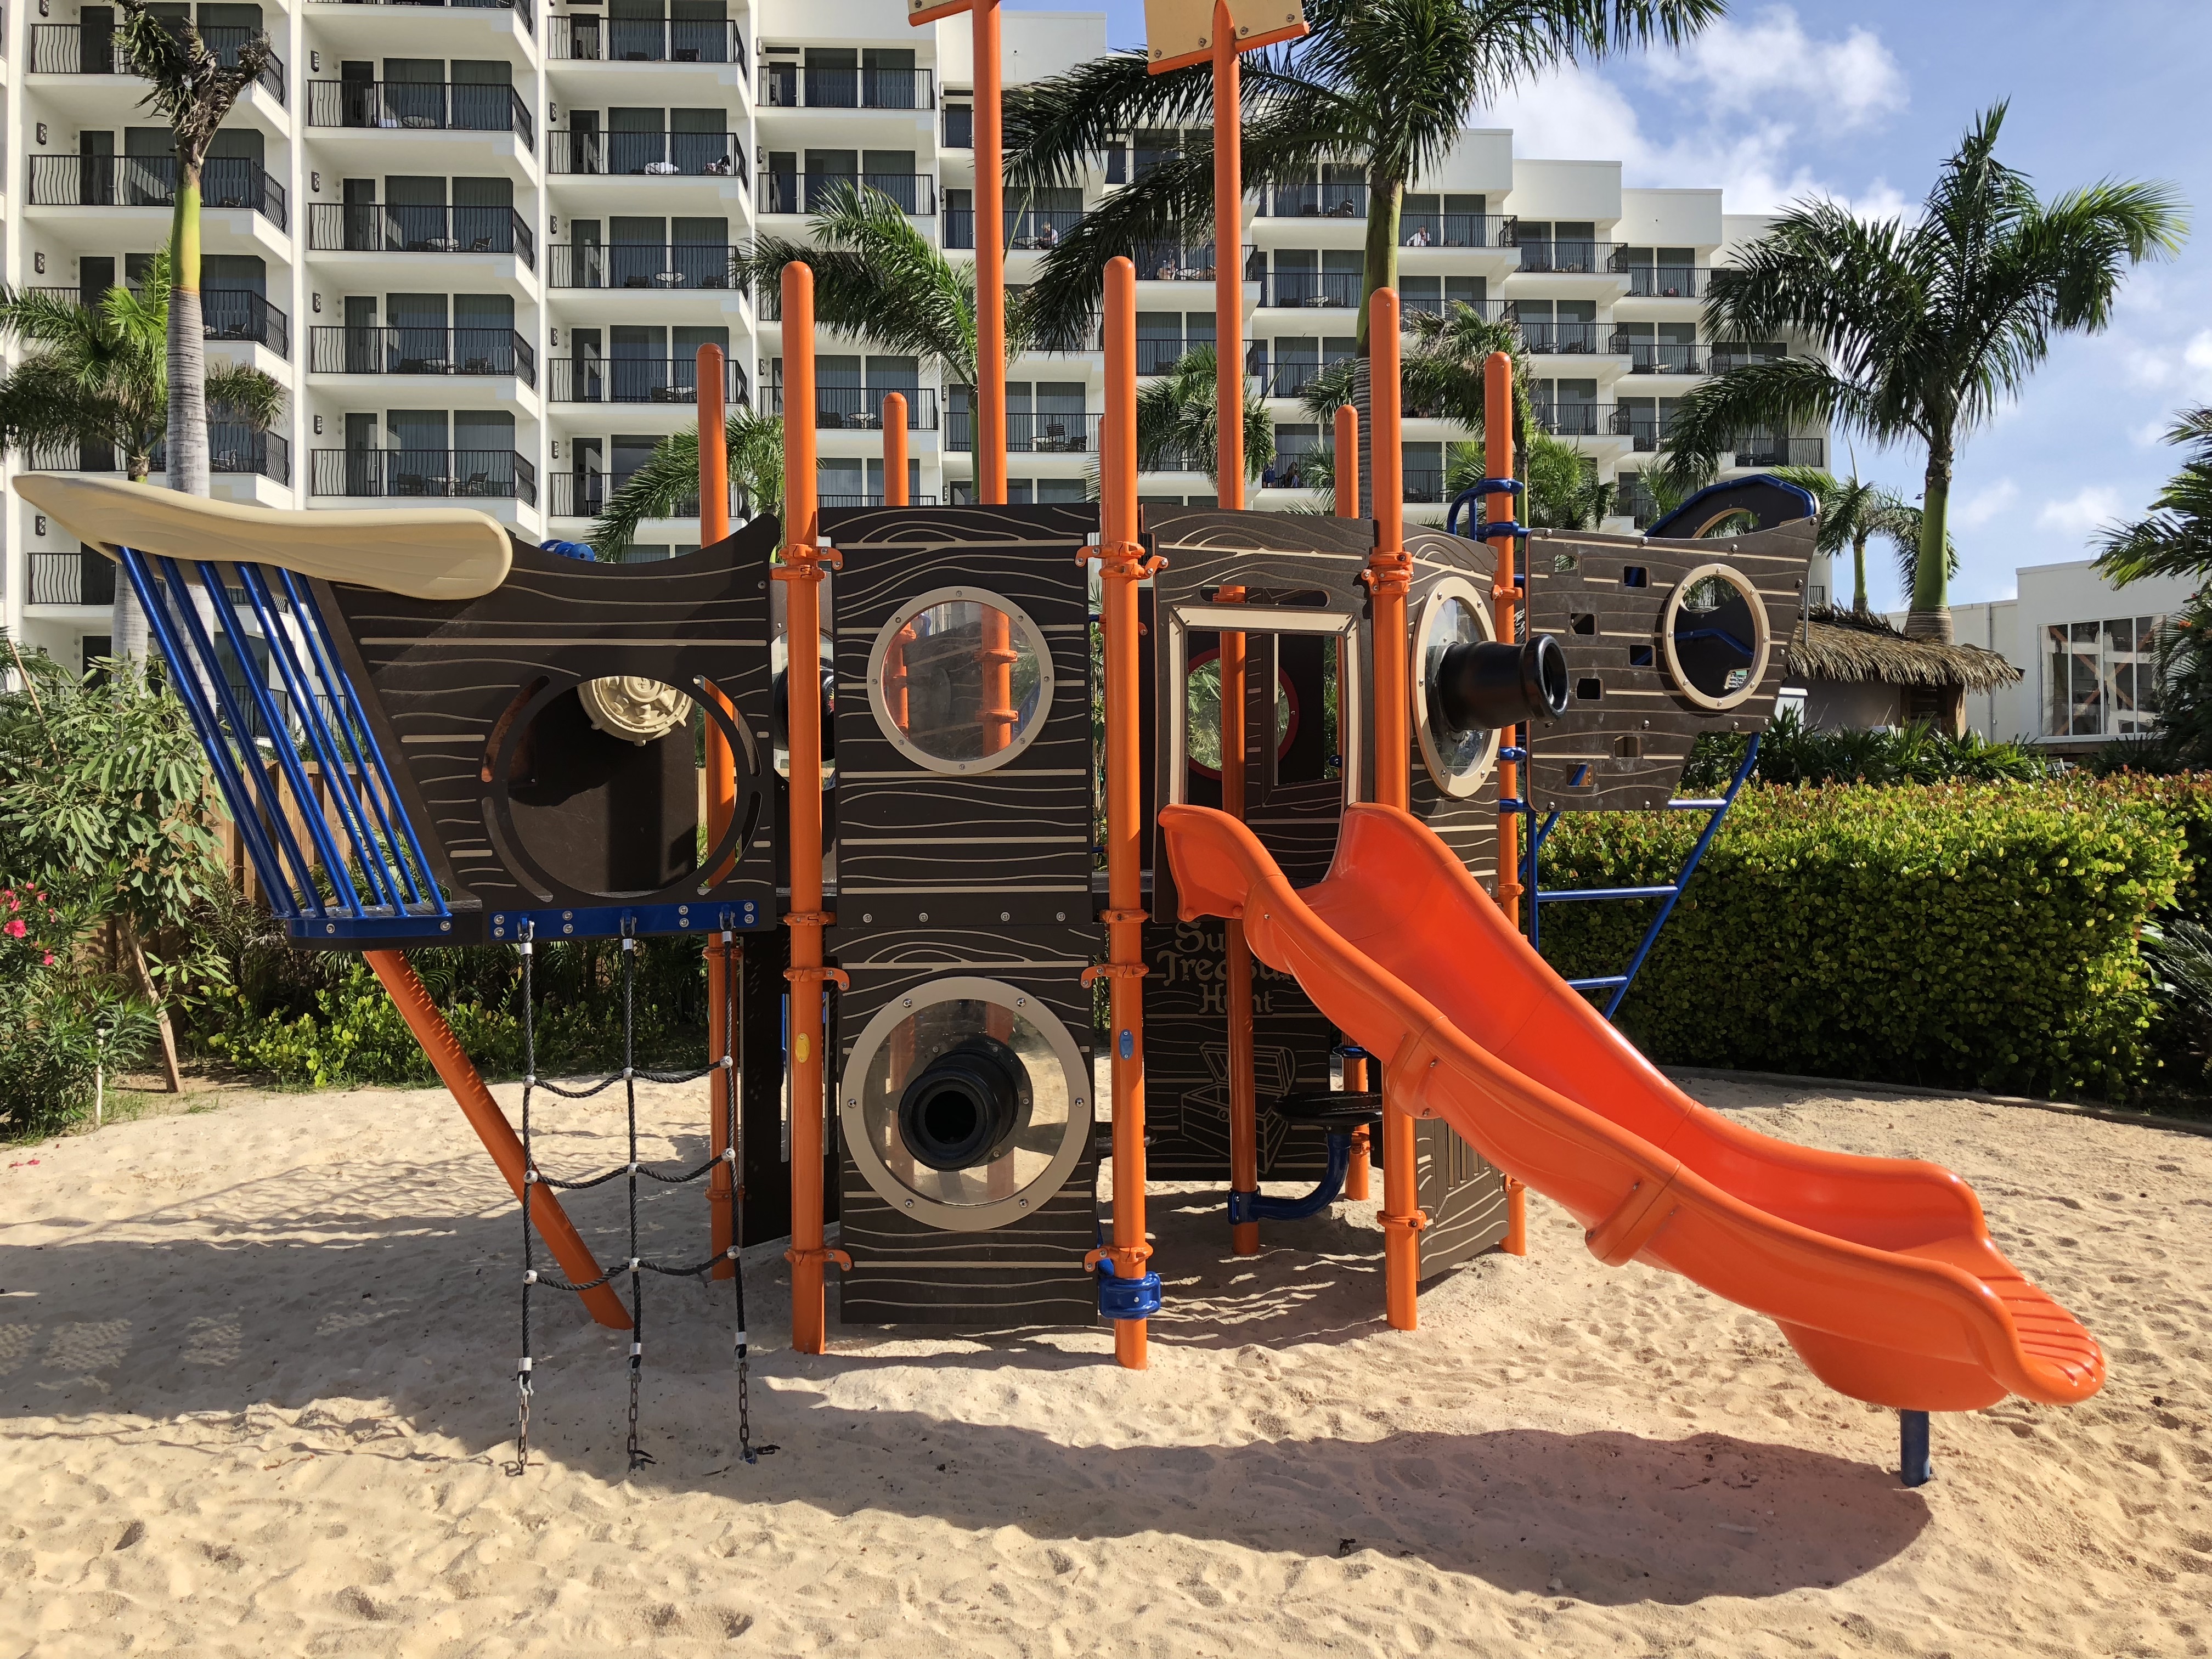 a playground with a slide in the sand